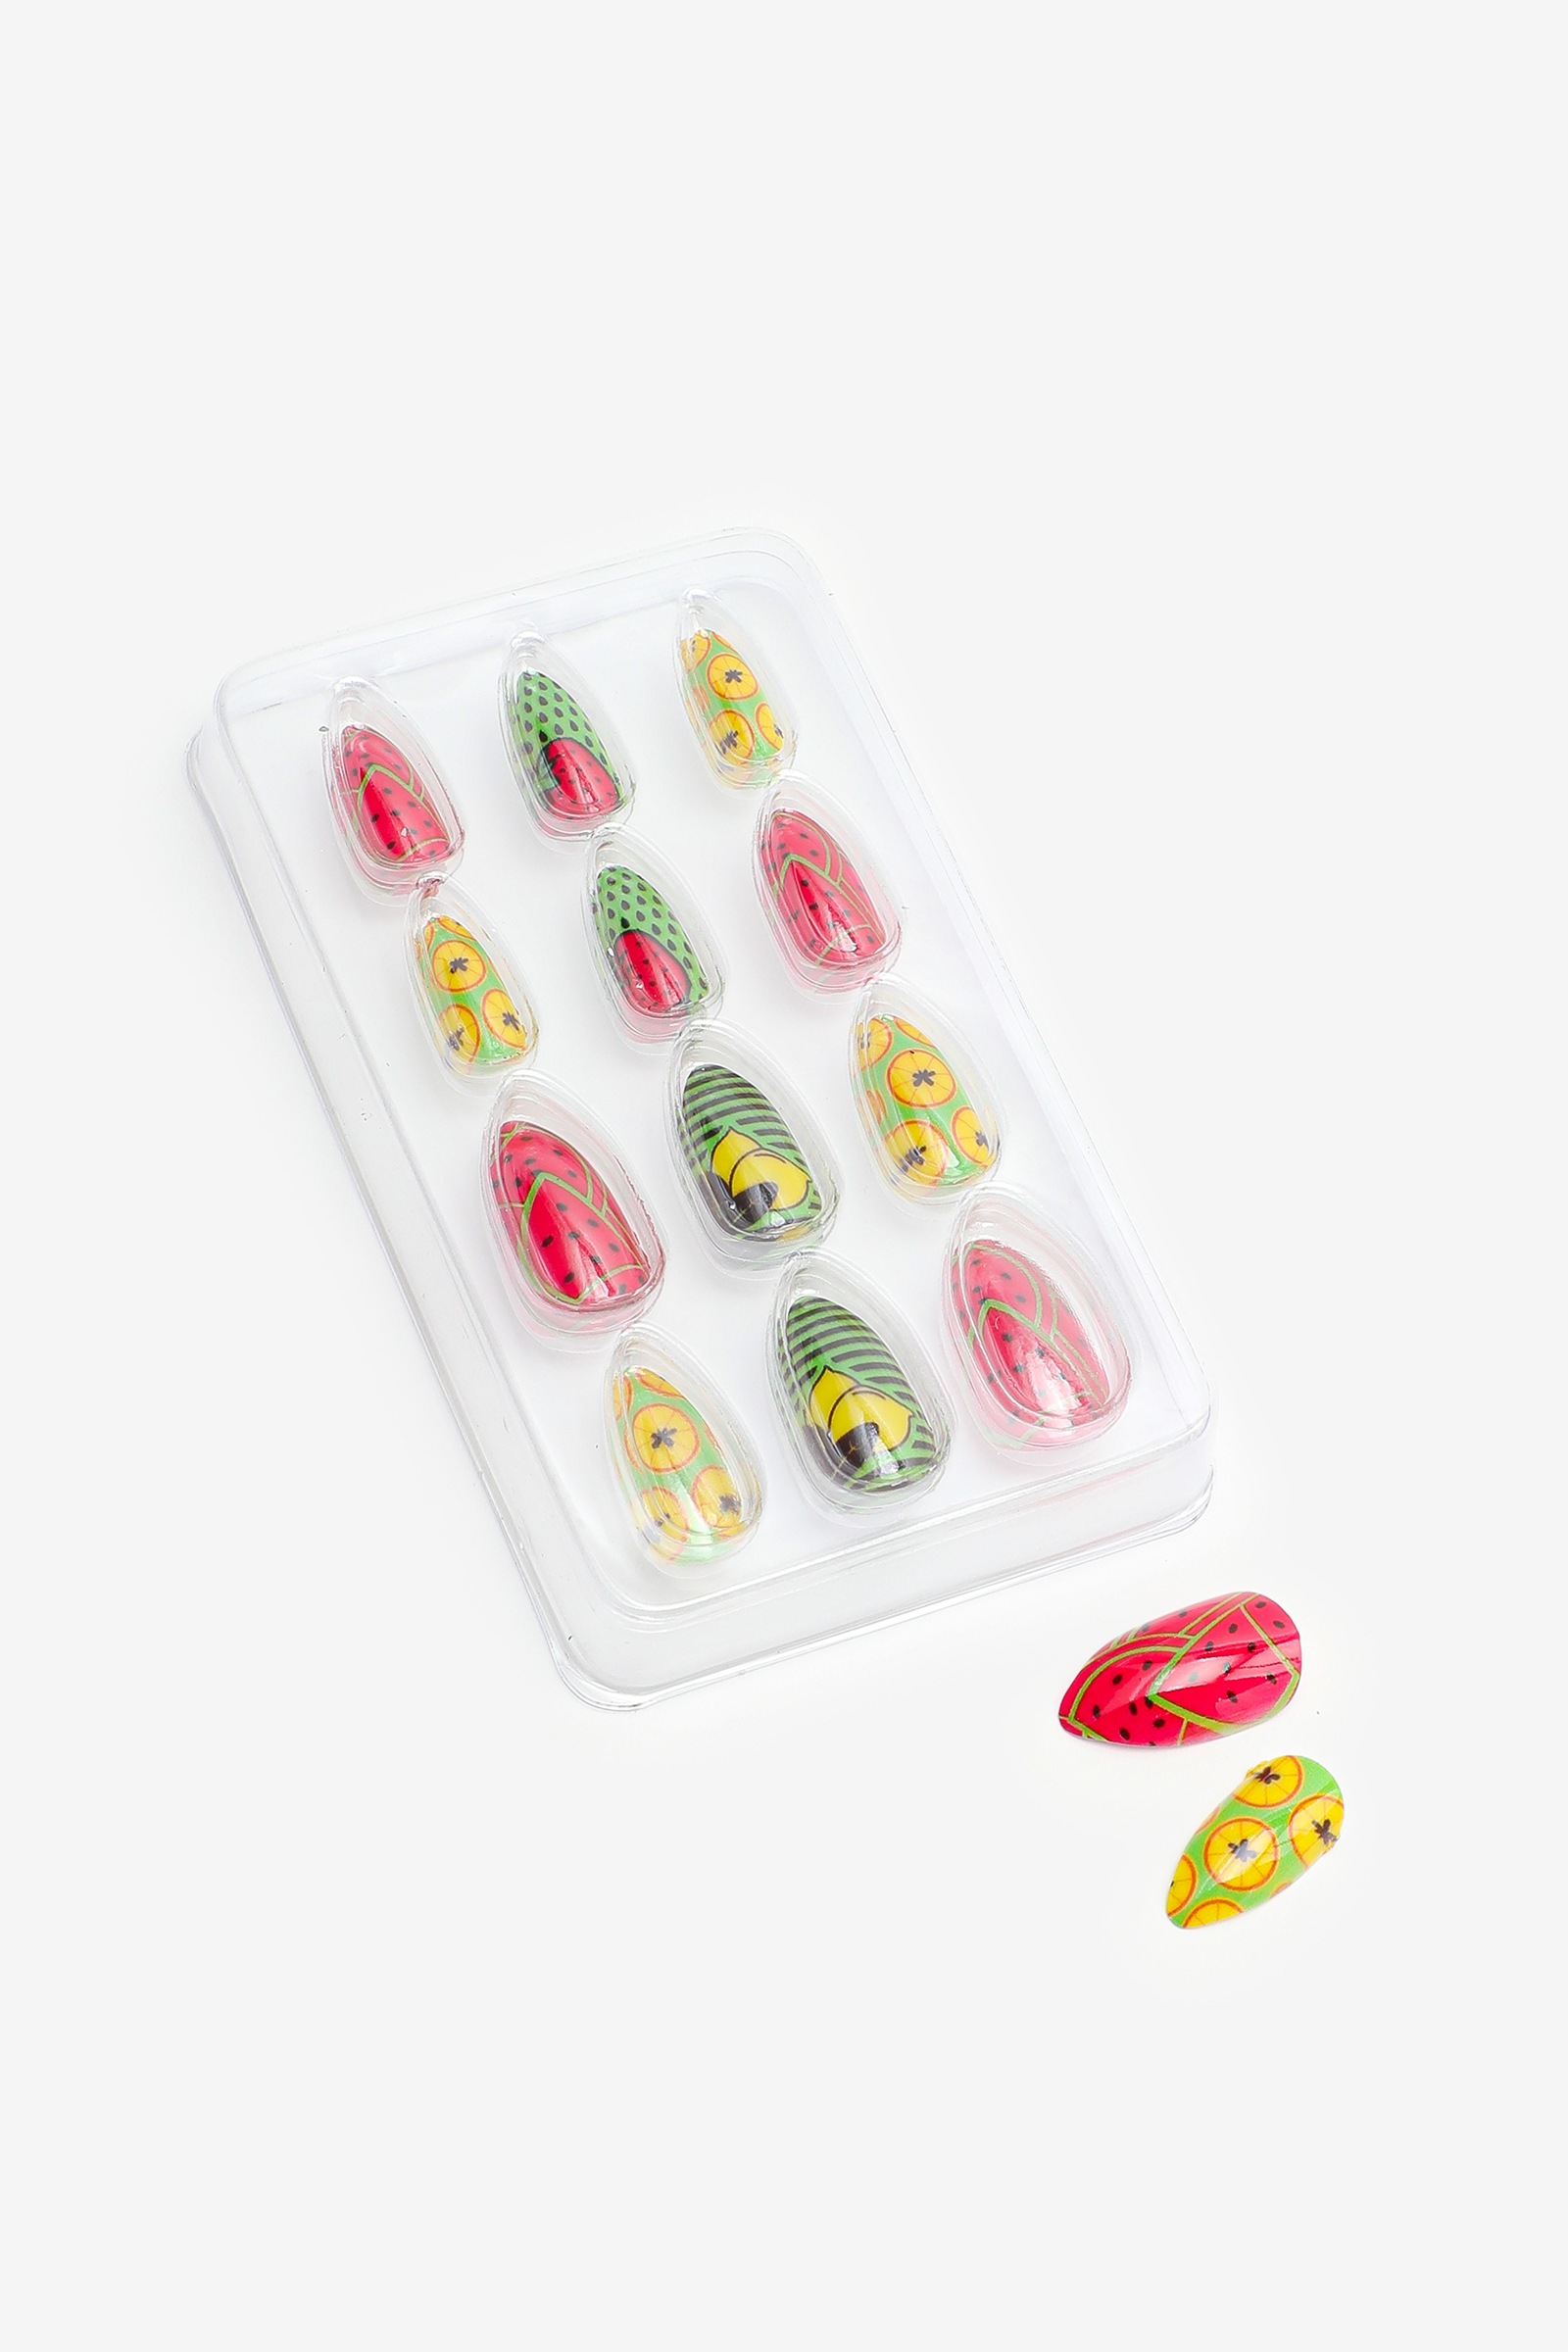 Pack of Bright Fruit Nails